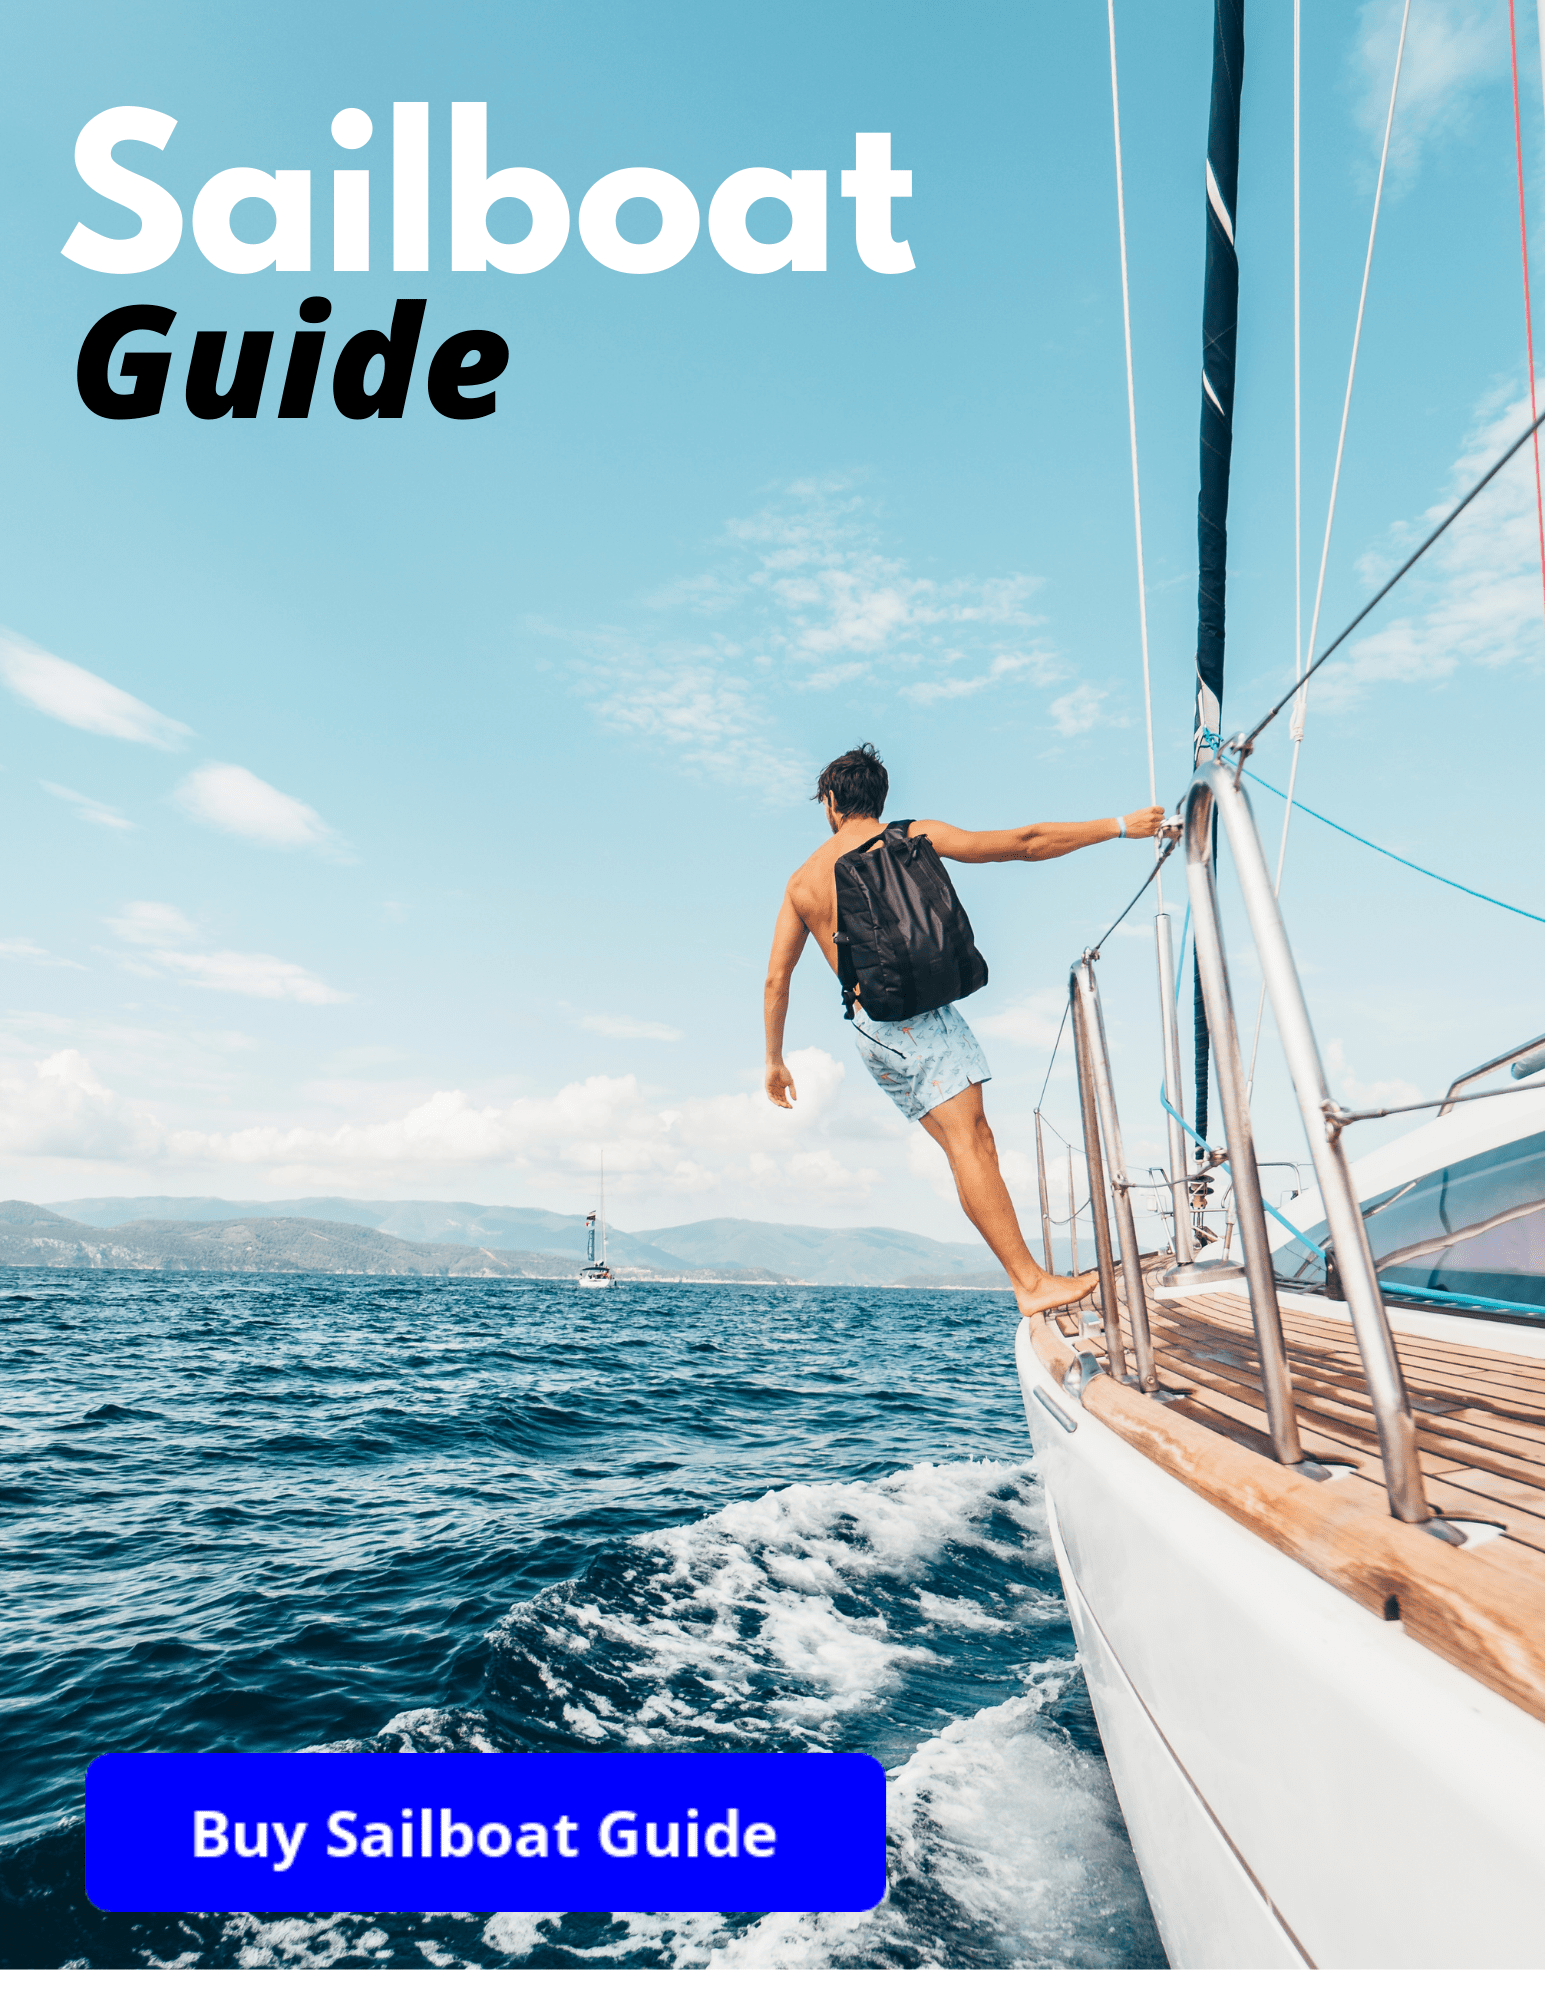 How to buy a sailboat